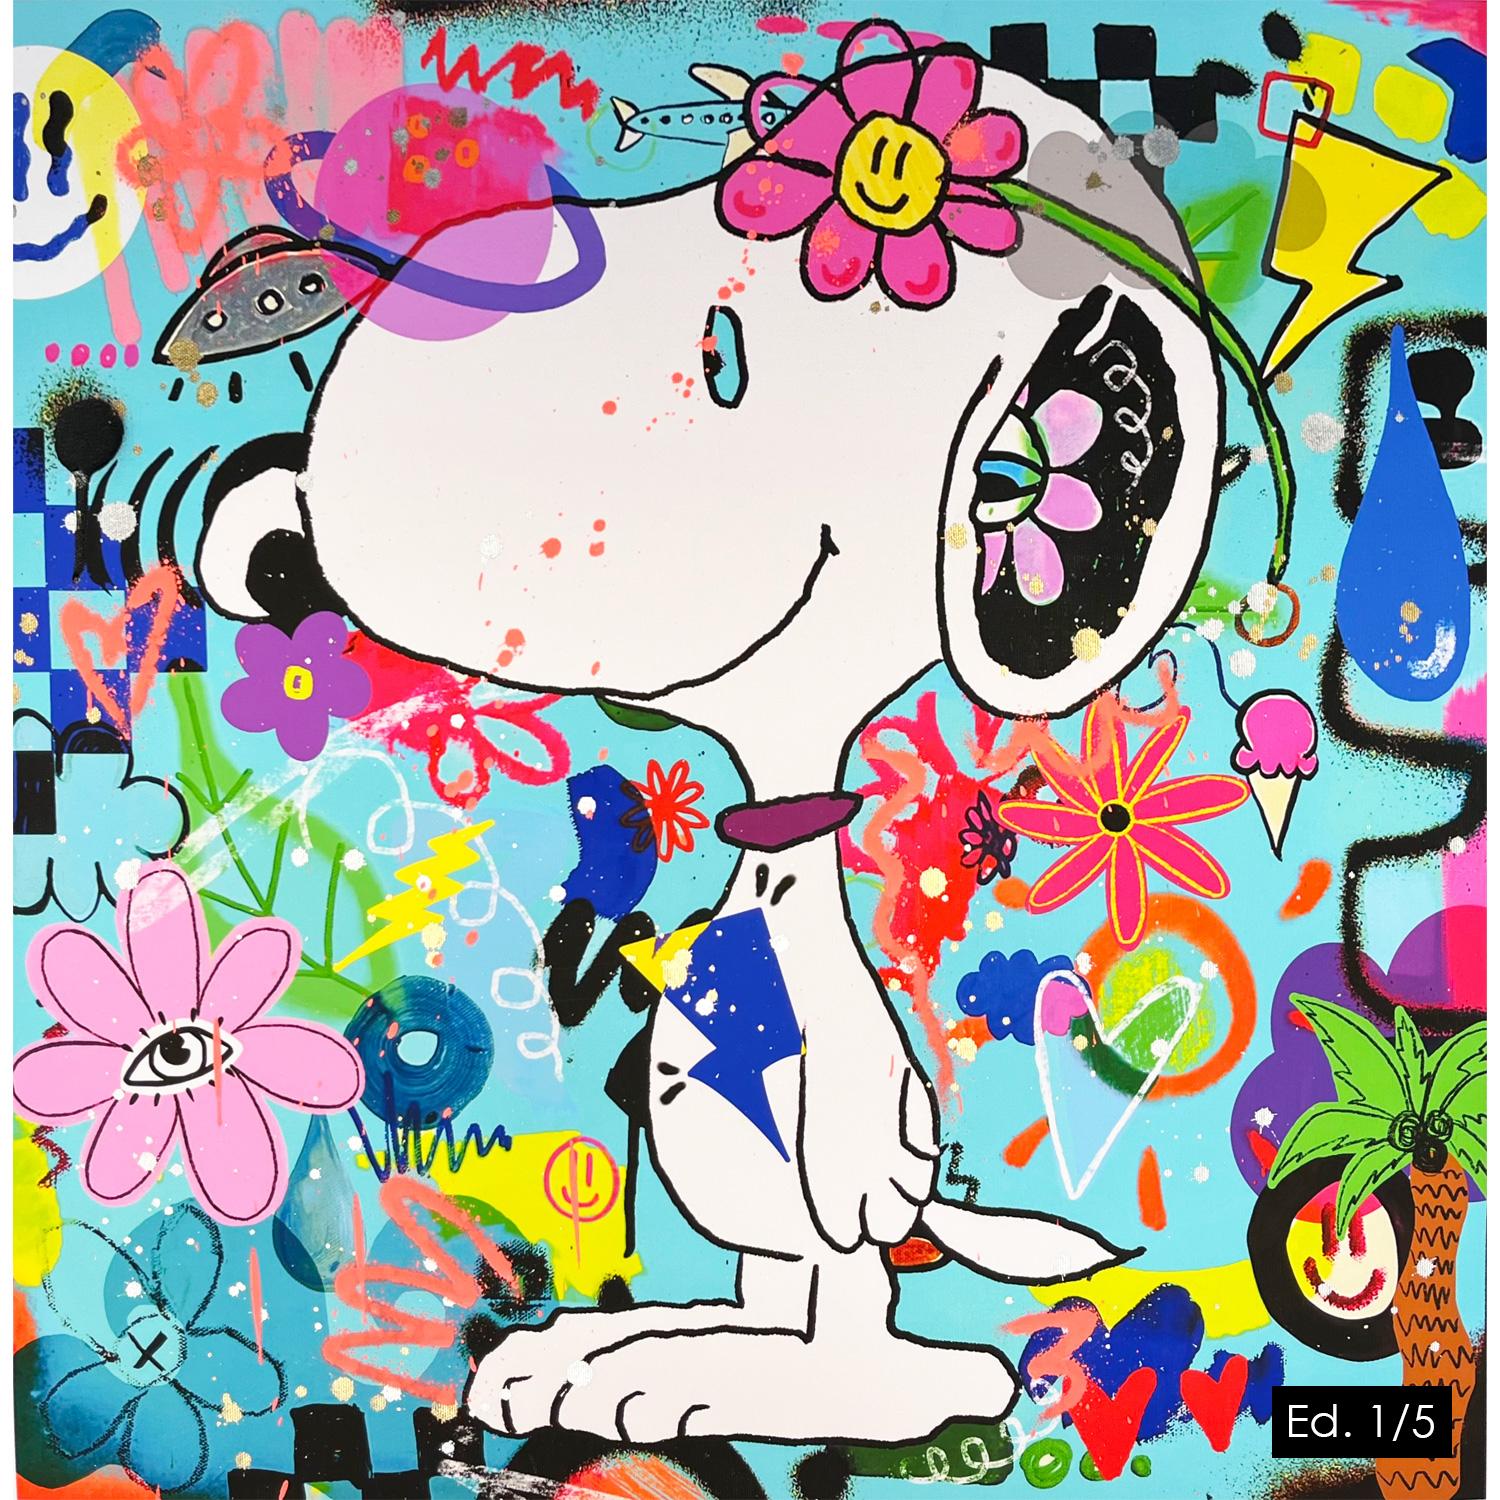 Snoopy limited edition, hand embellished Peanuts print, edition of 5